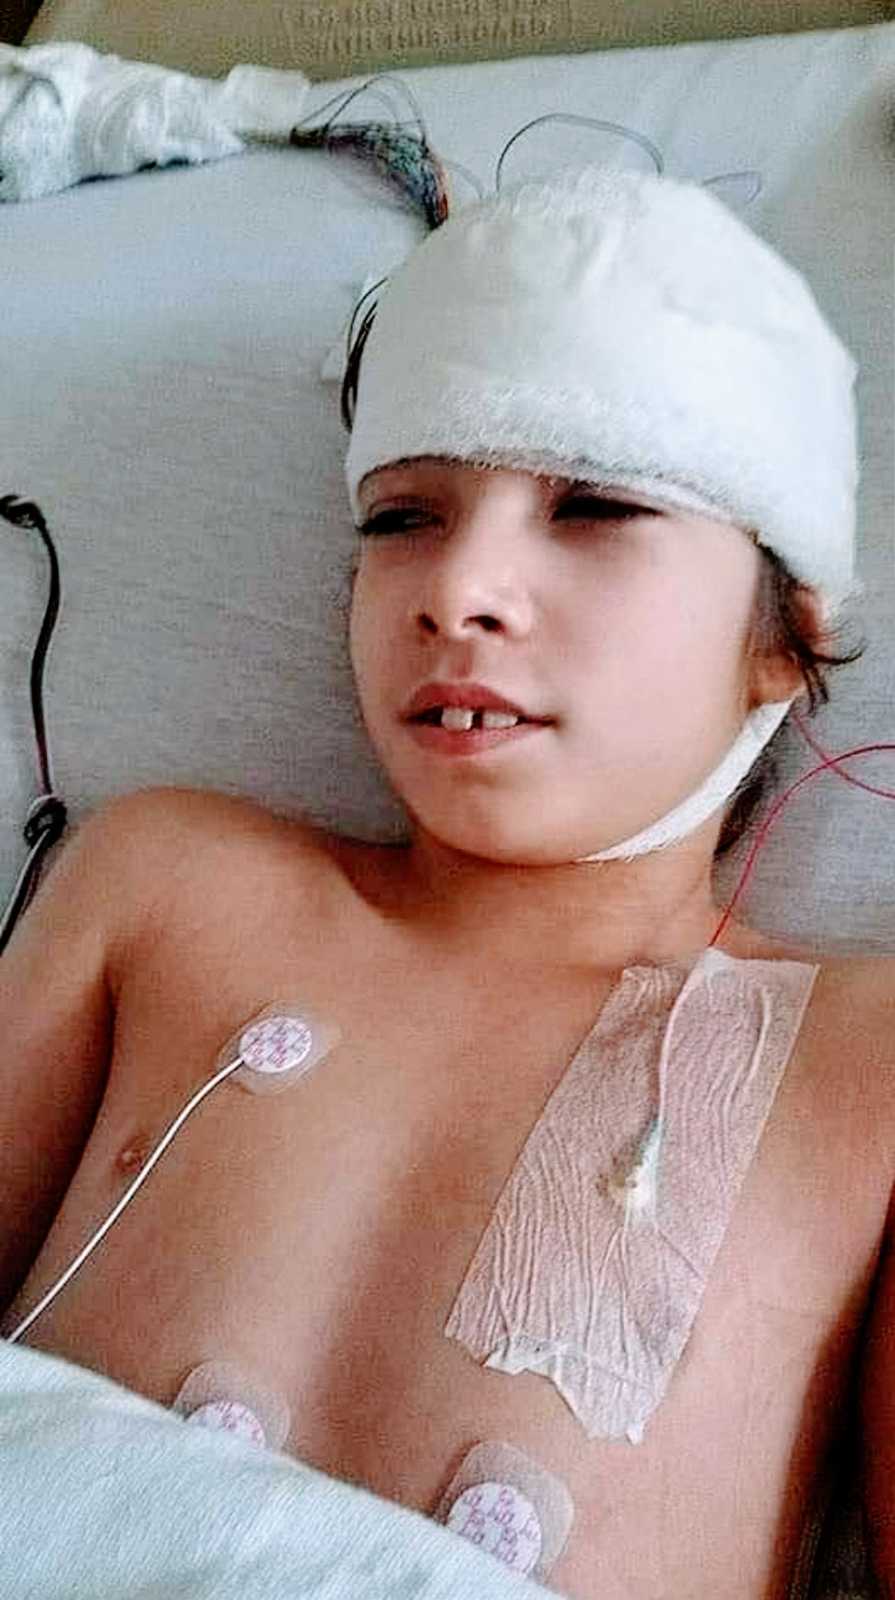 A boy with rare seizures lies in a hospital bed with bandages and wires